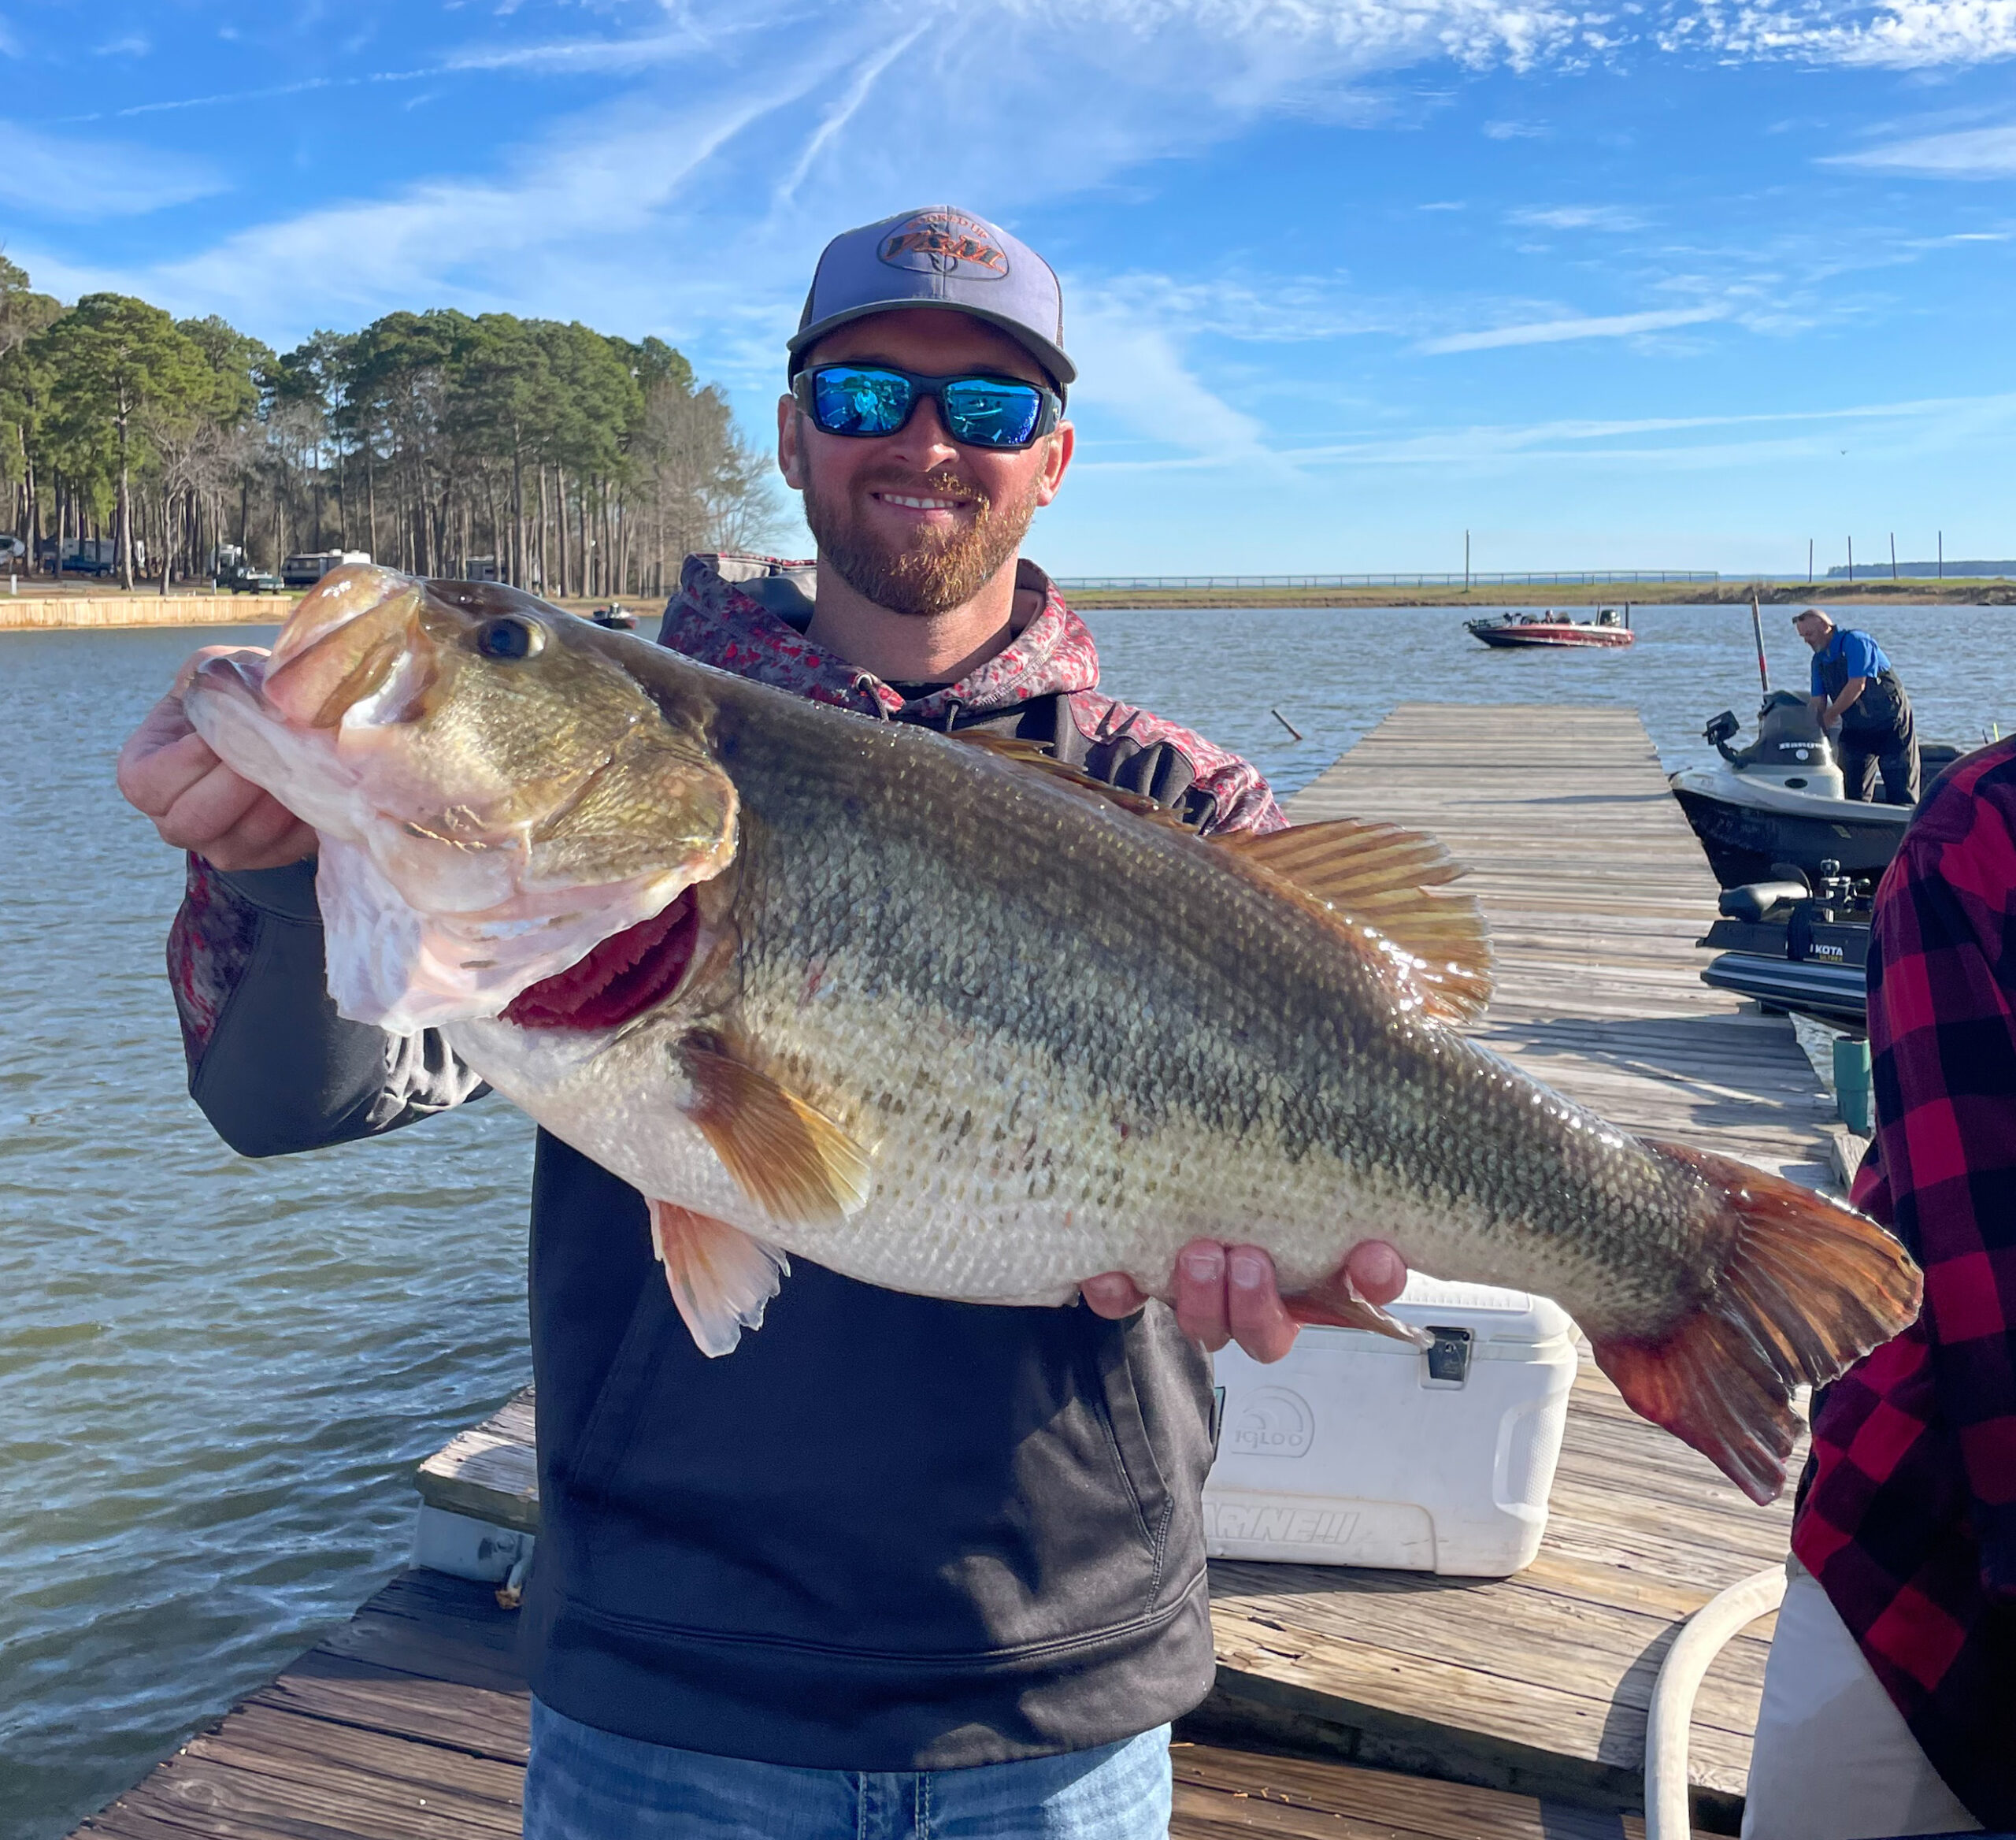 Pitt smashes MLF records with 13-6 largemouth, bags 39-15 five-fish limit  on Toledo Bend - Major League Fishing